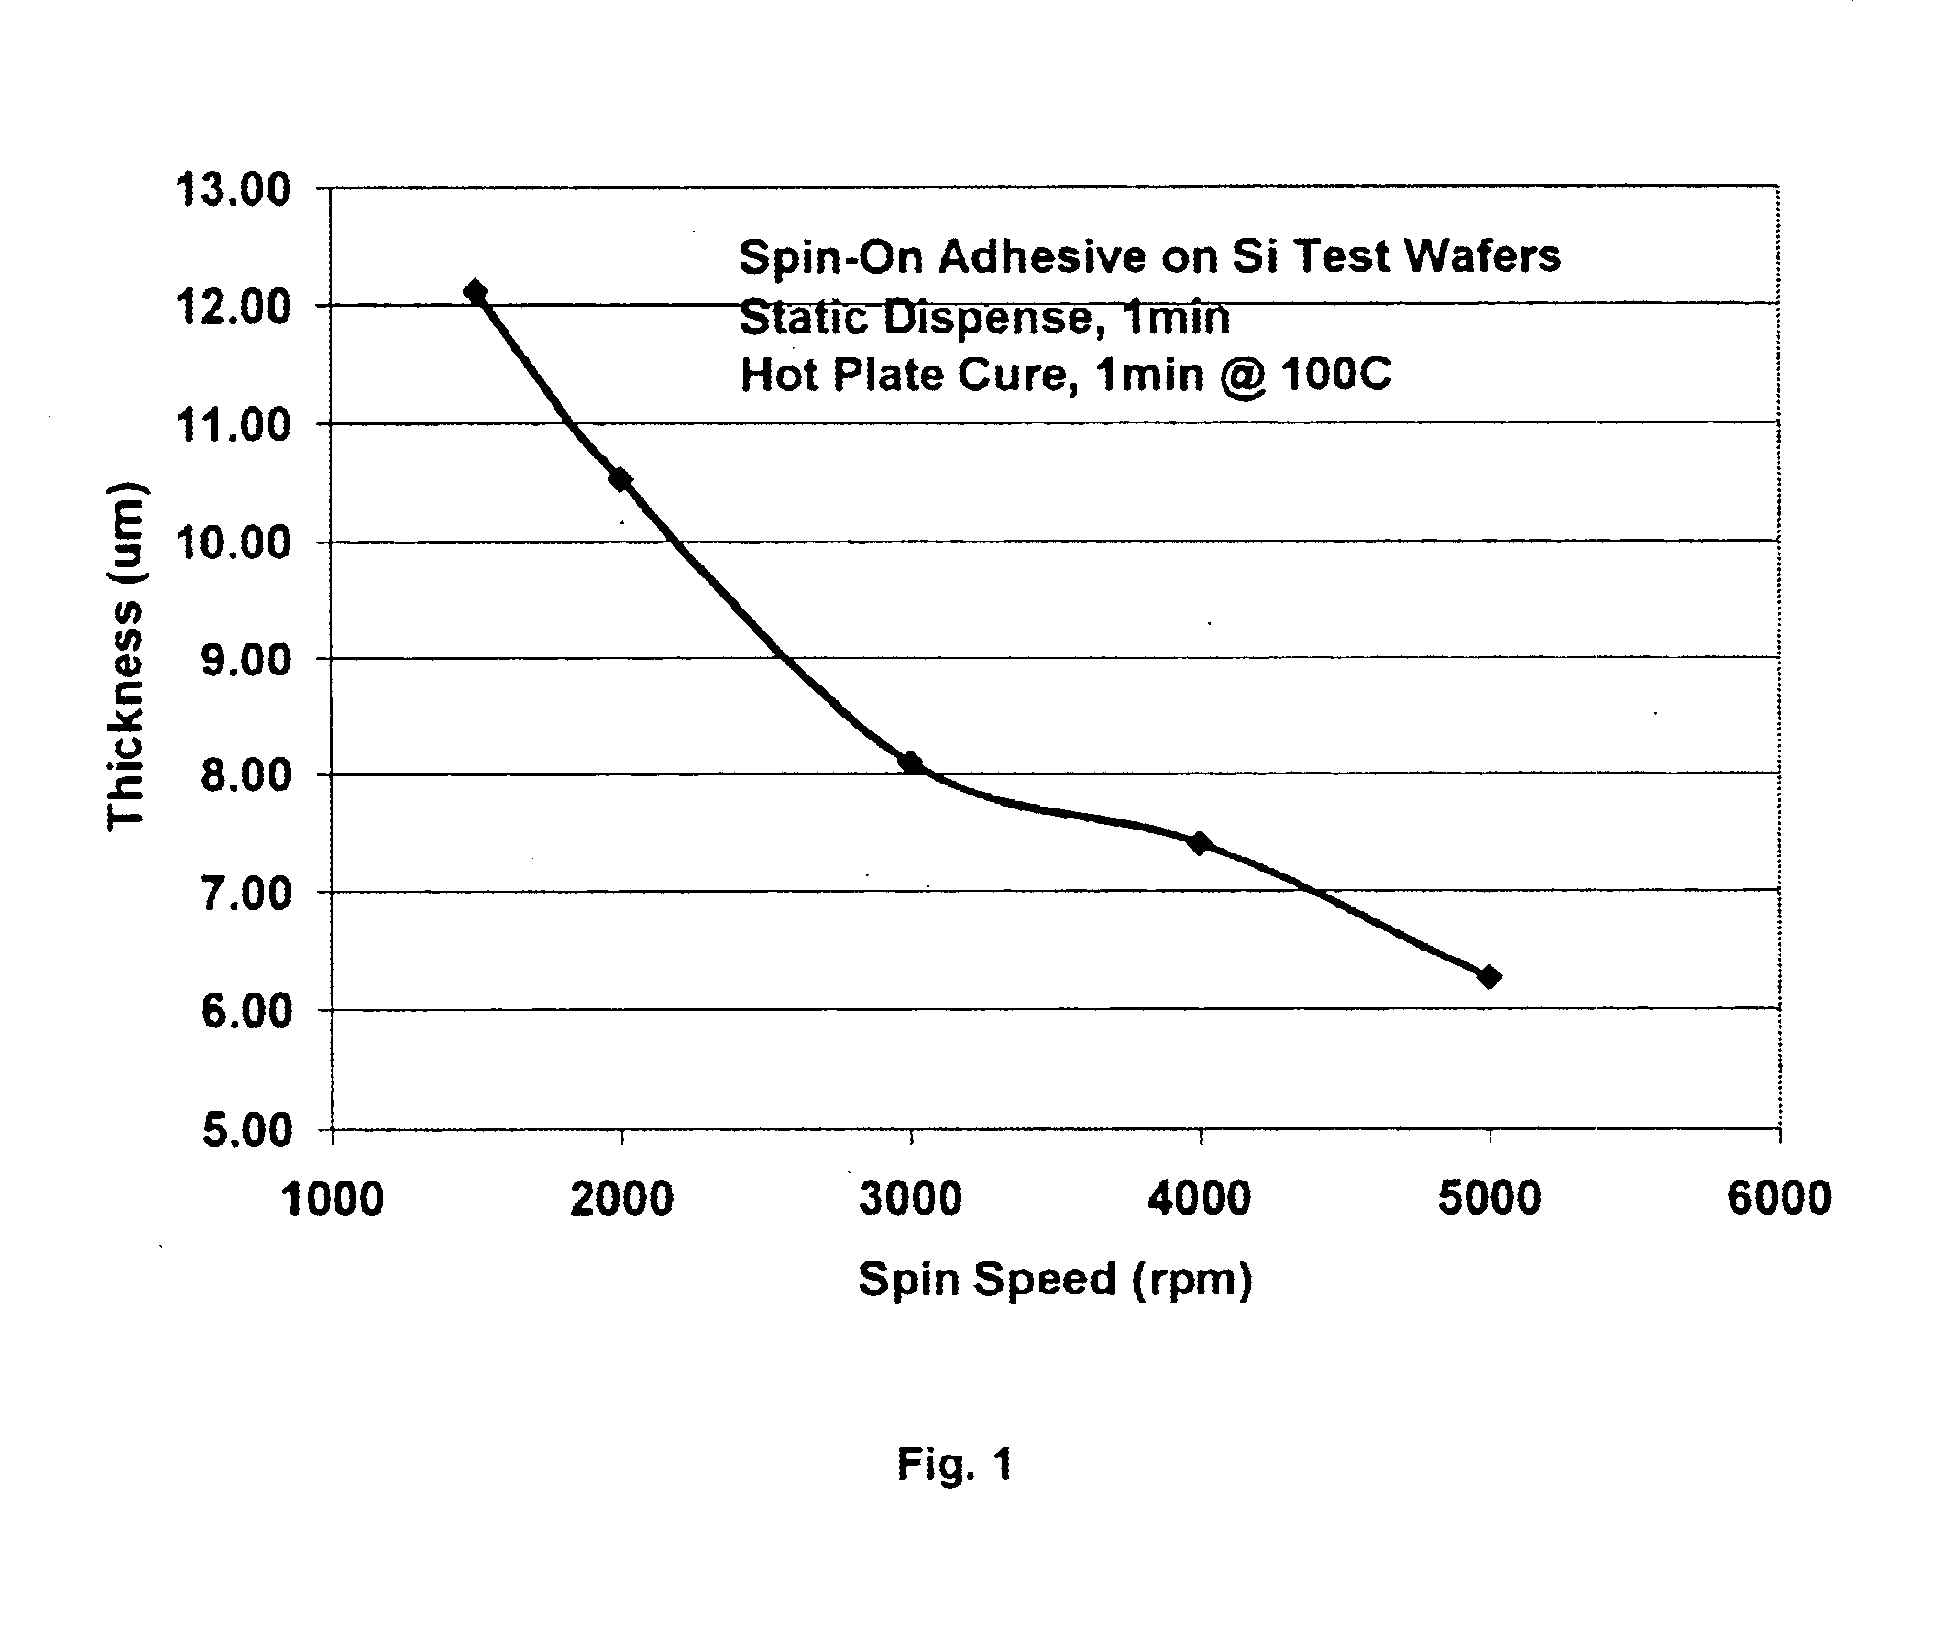 Spin-on adhesive for temporary wafer coating and mounting to support wafer thinning and backside processing